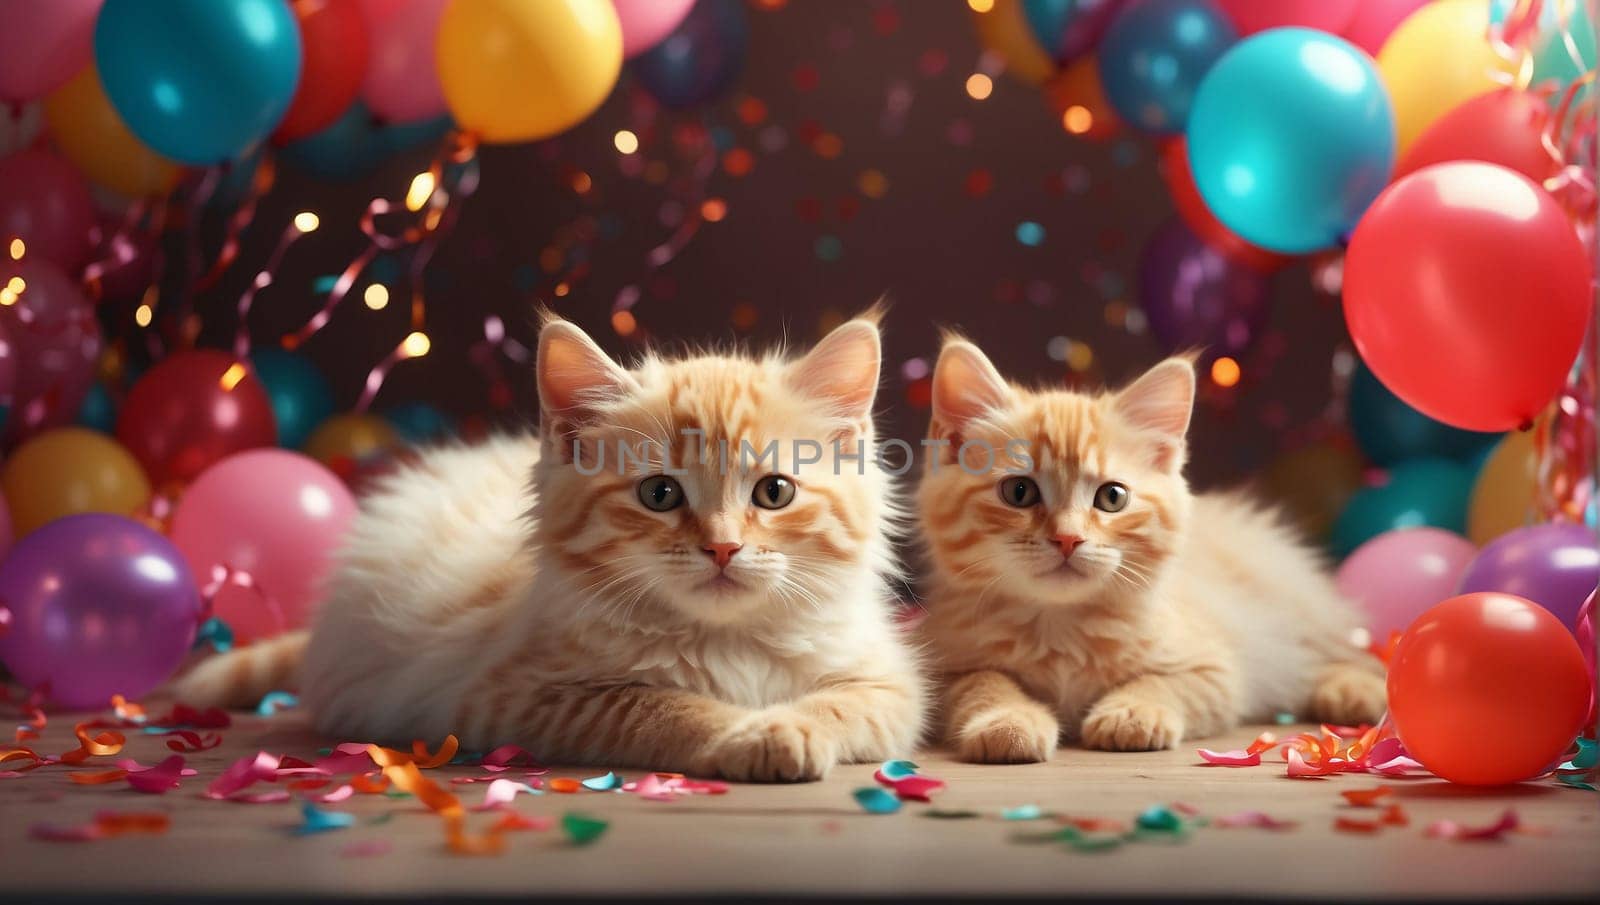 Kittens on dark festive background with balloons by Севостьянов